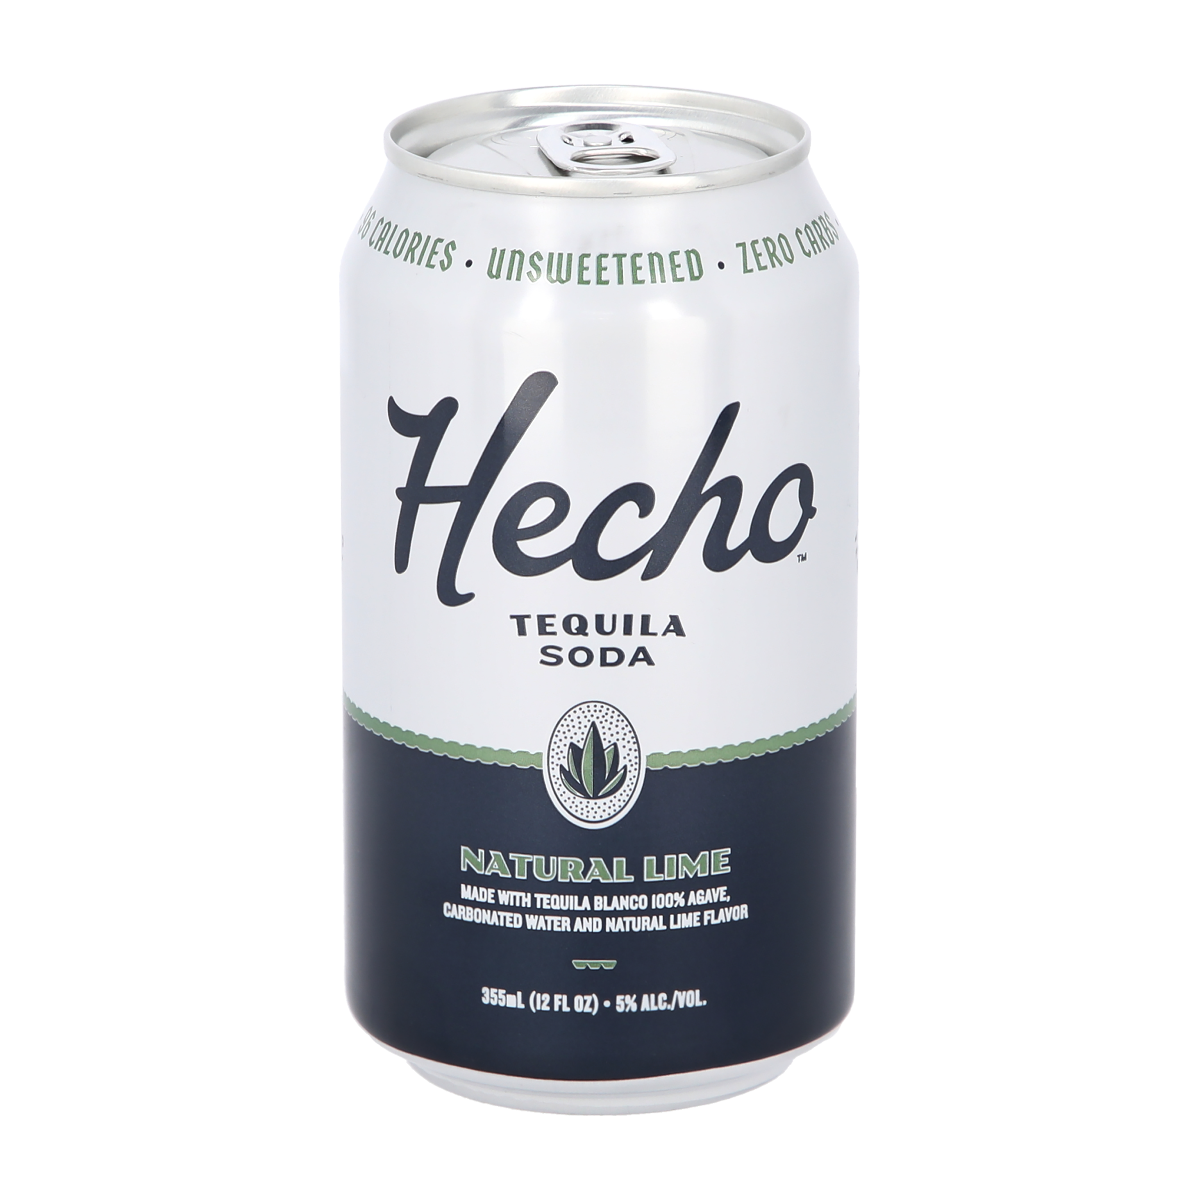 Hecho Tequila Soda 4 Pack